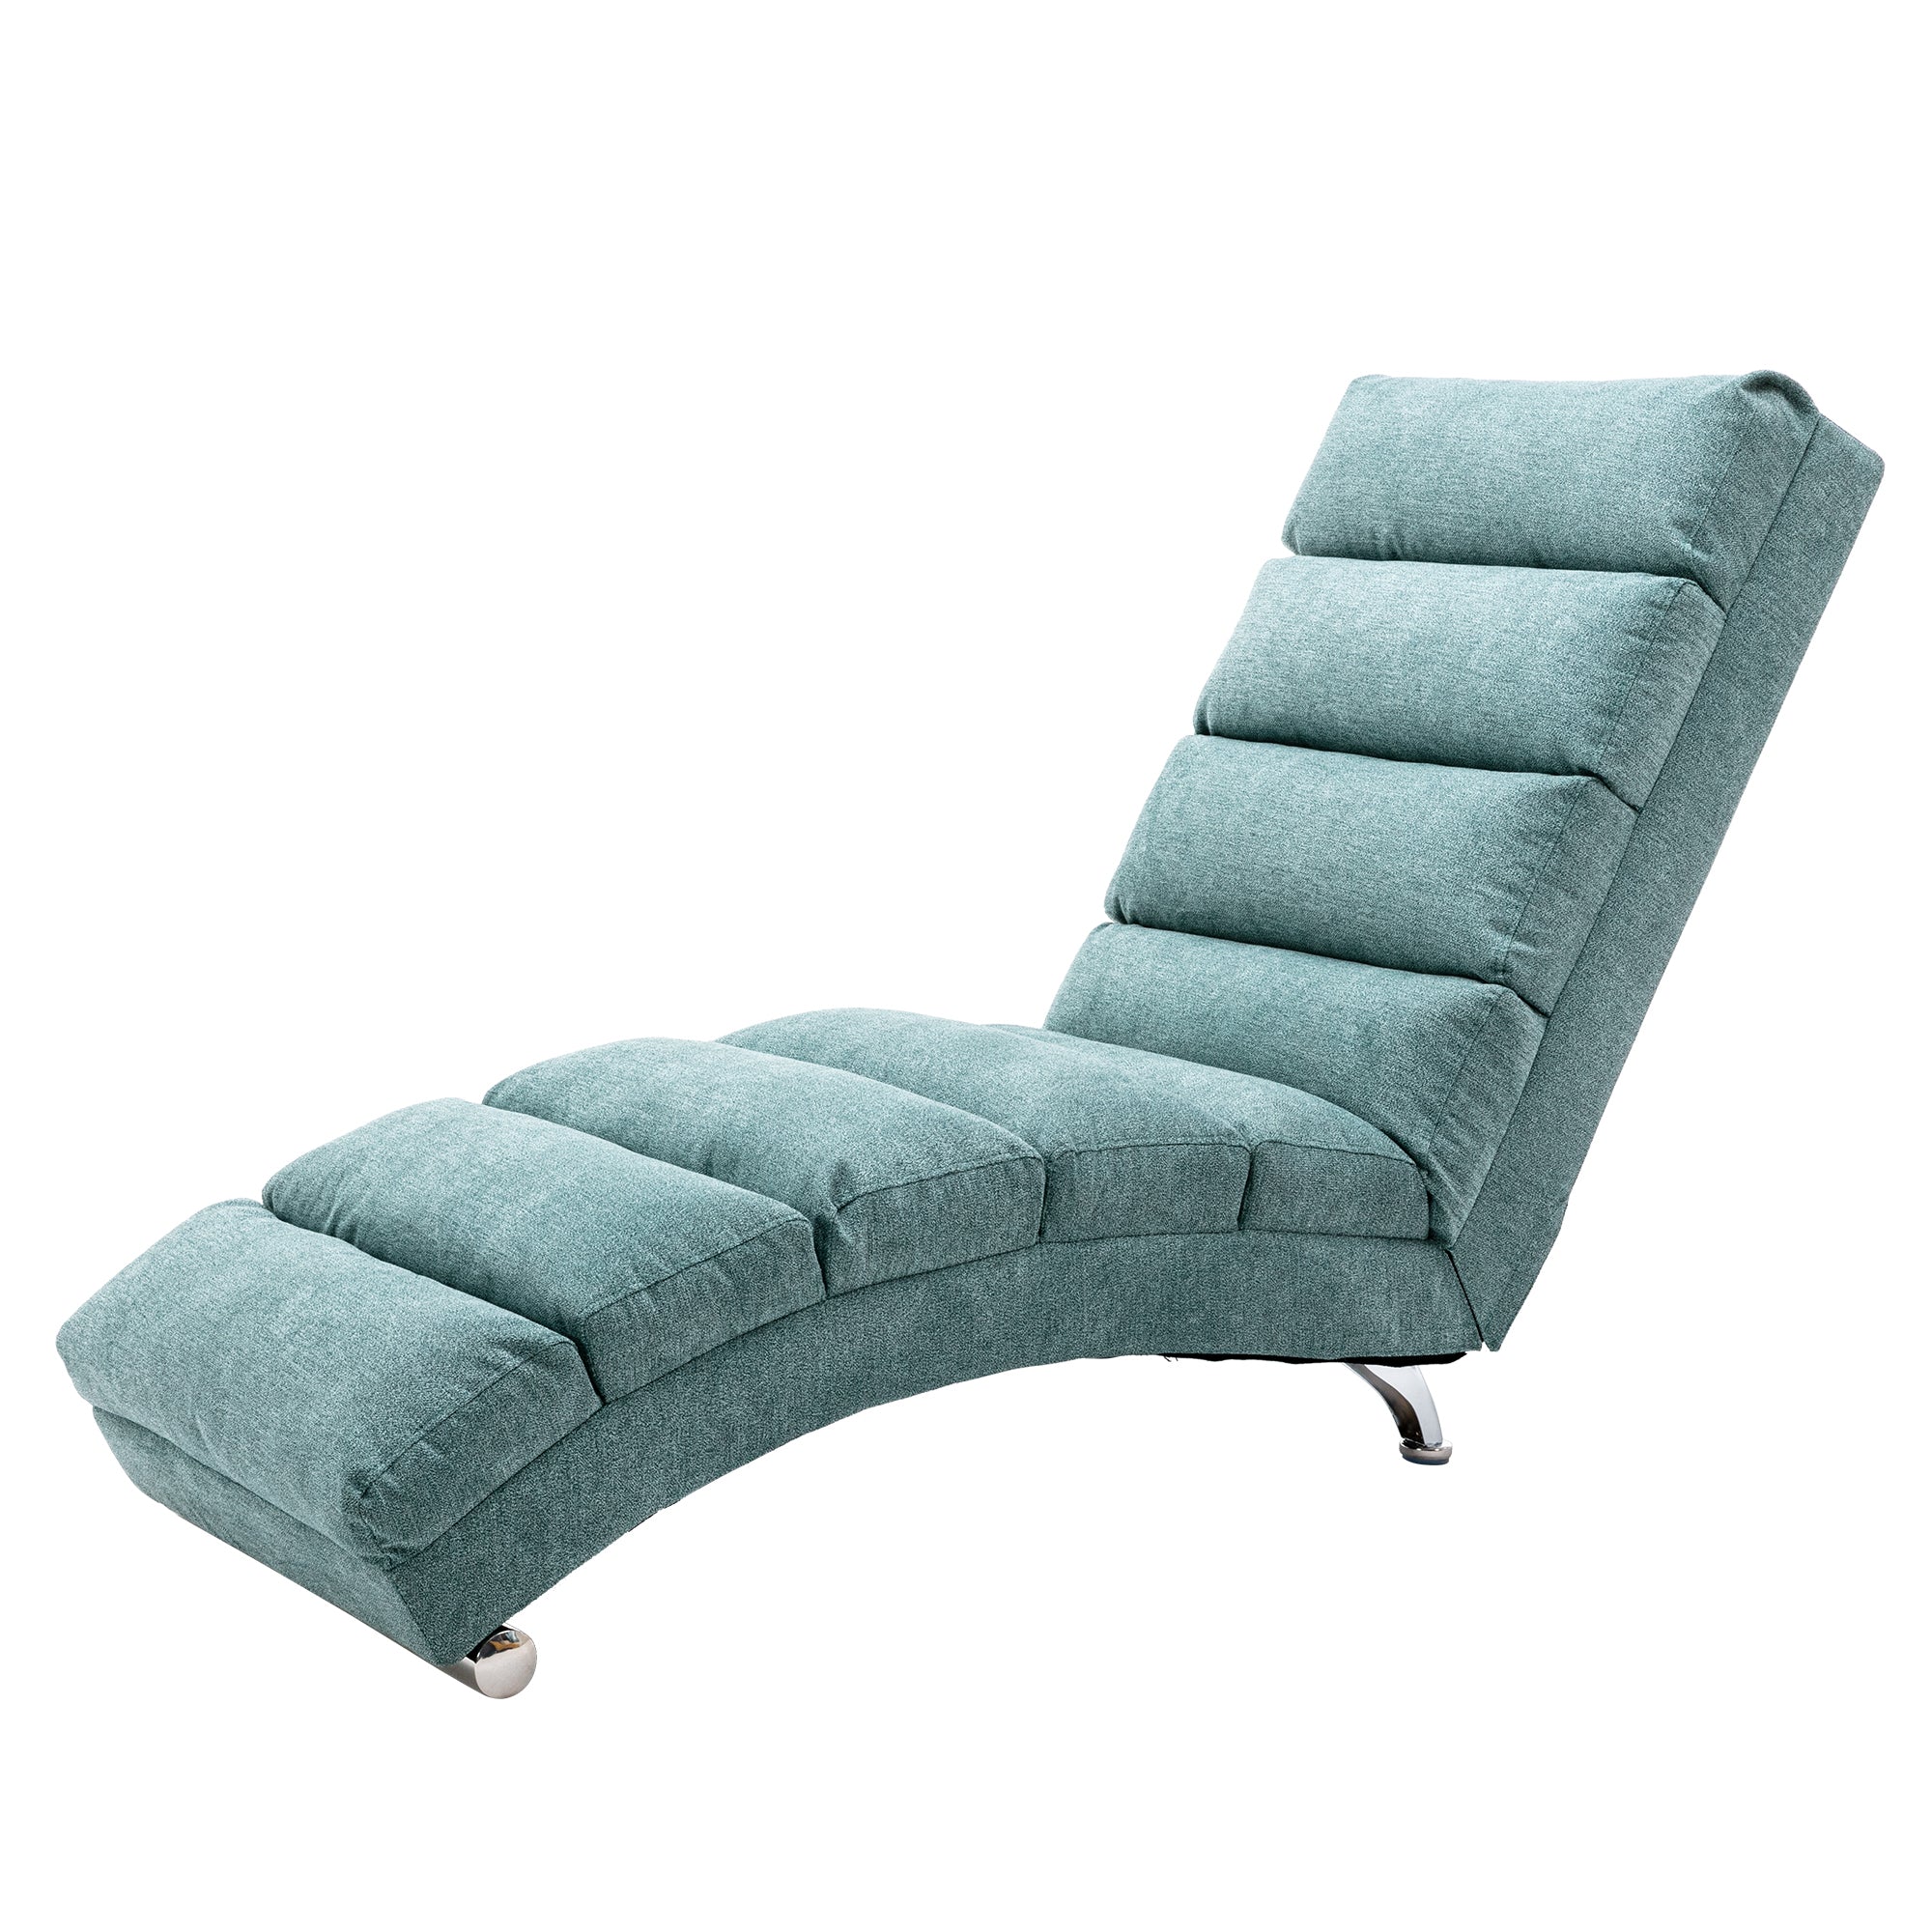 COOLMORE Linen Chaise Lounge Indoor Chair